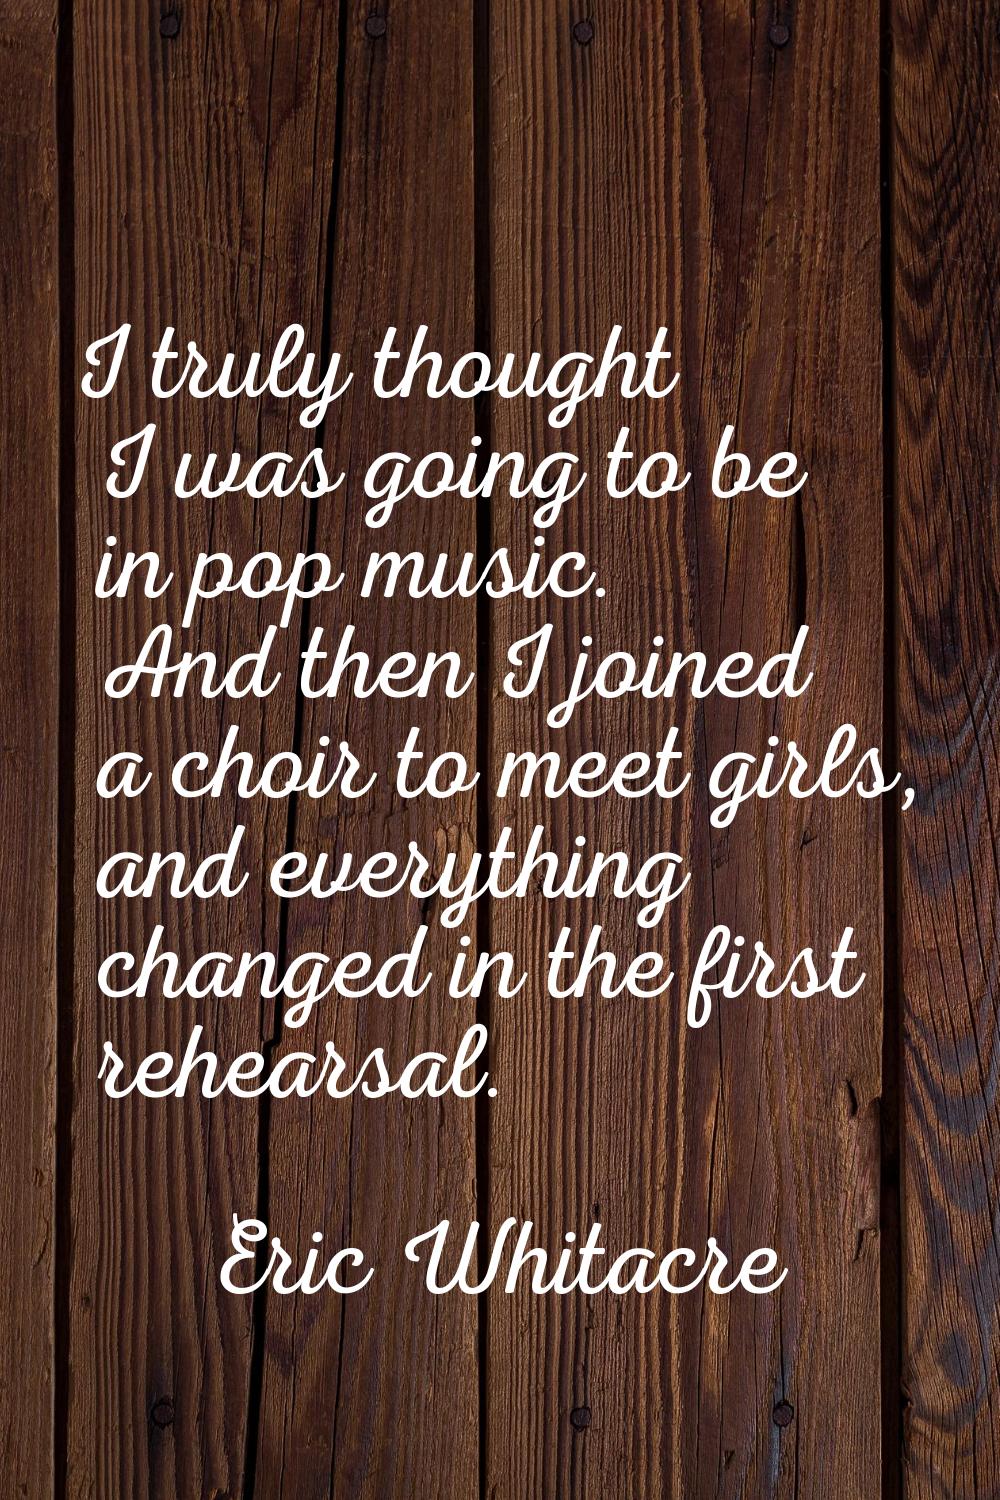 I truly thought I was going to be in pop music. And then I joined a choir to meet girls, and everyt